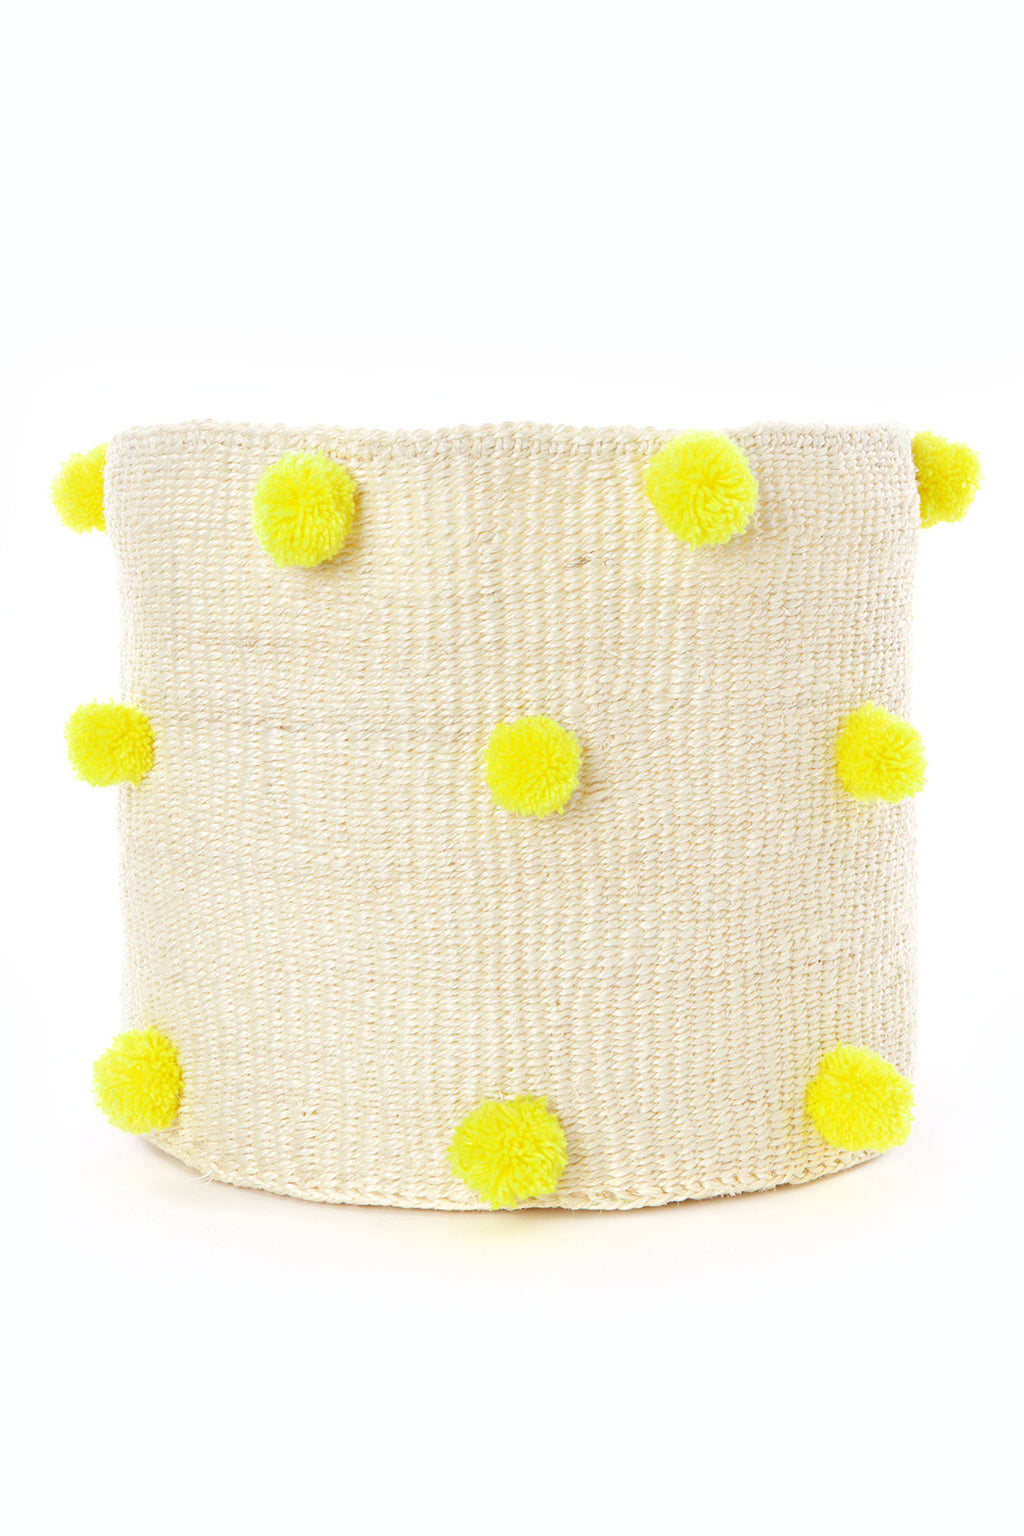 Natural Sisal Bin with Yellow Pom Poms